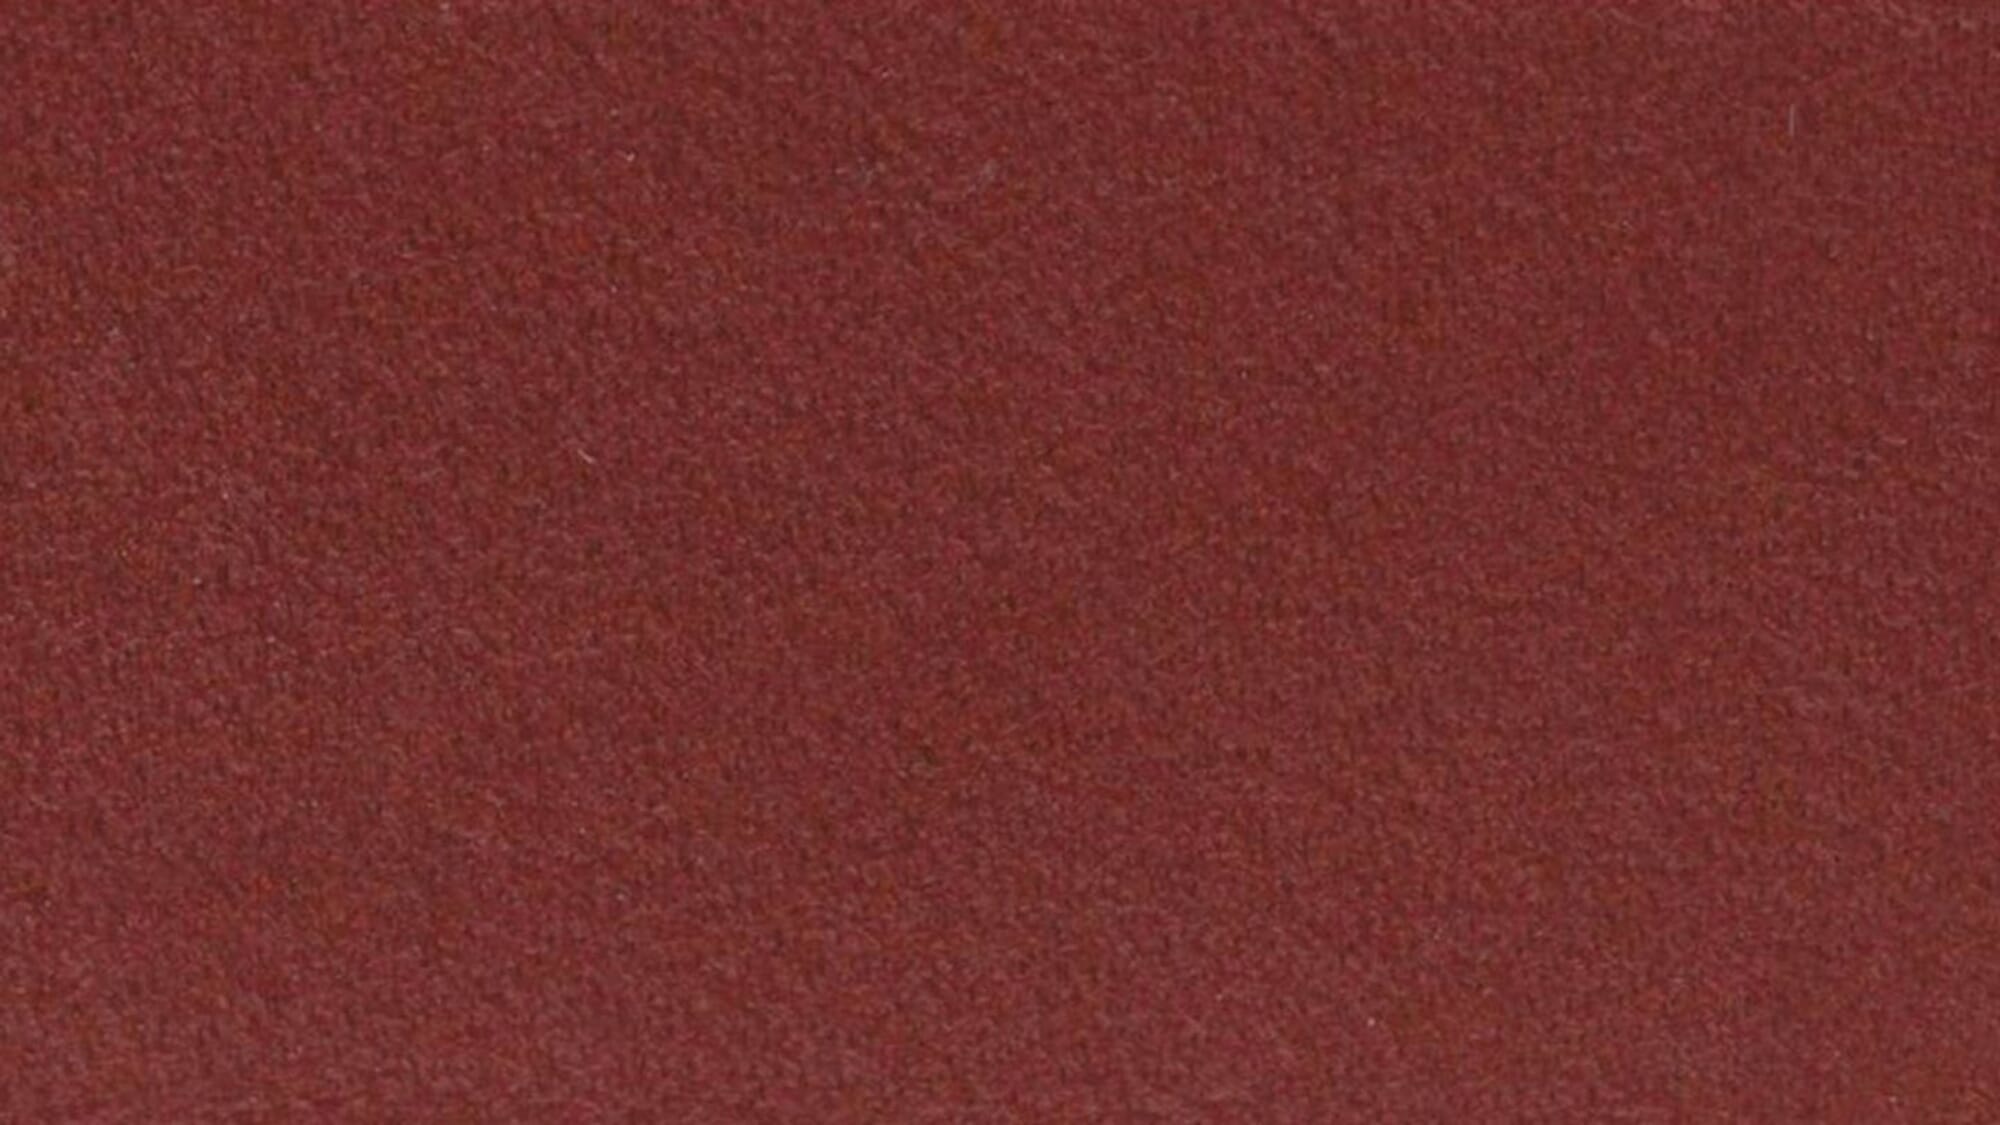 Leather Dye Paint Chocolate Brown – buy in UK online shop –HD Chemicals LTD